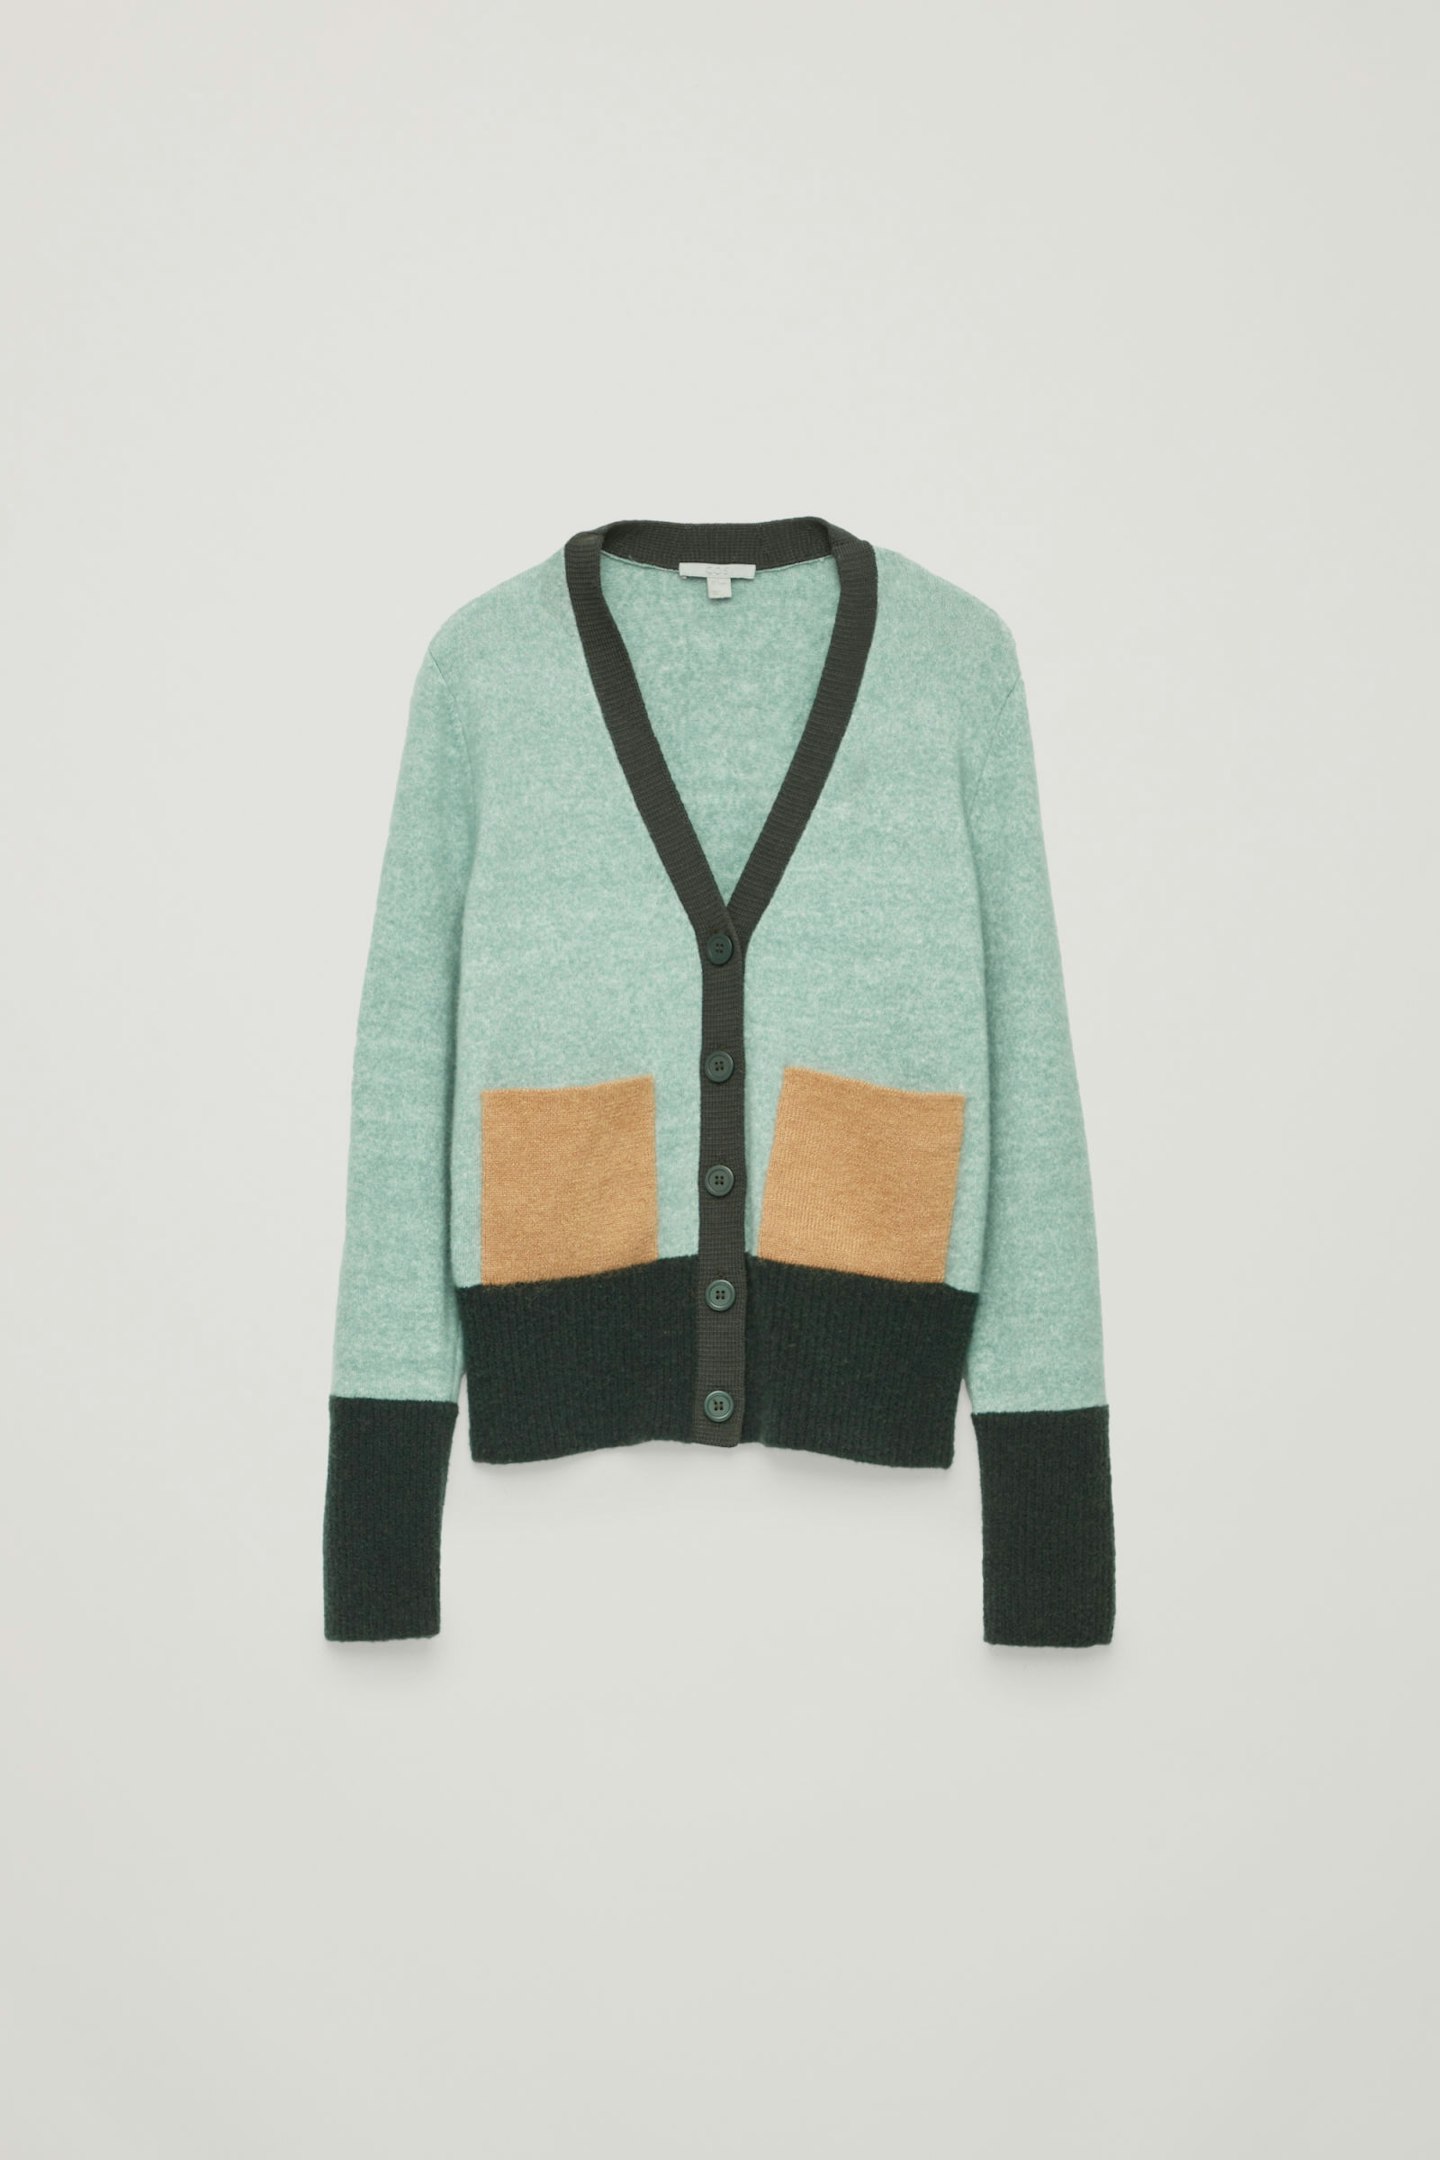 Cos, Colour-Block Cardigan With Pockets, £69